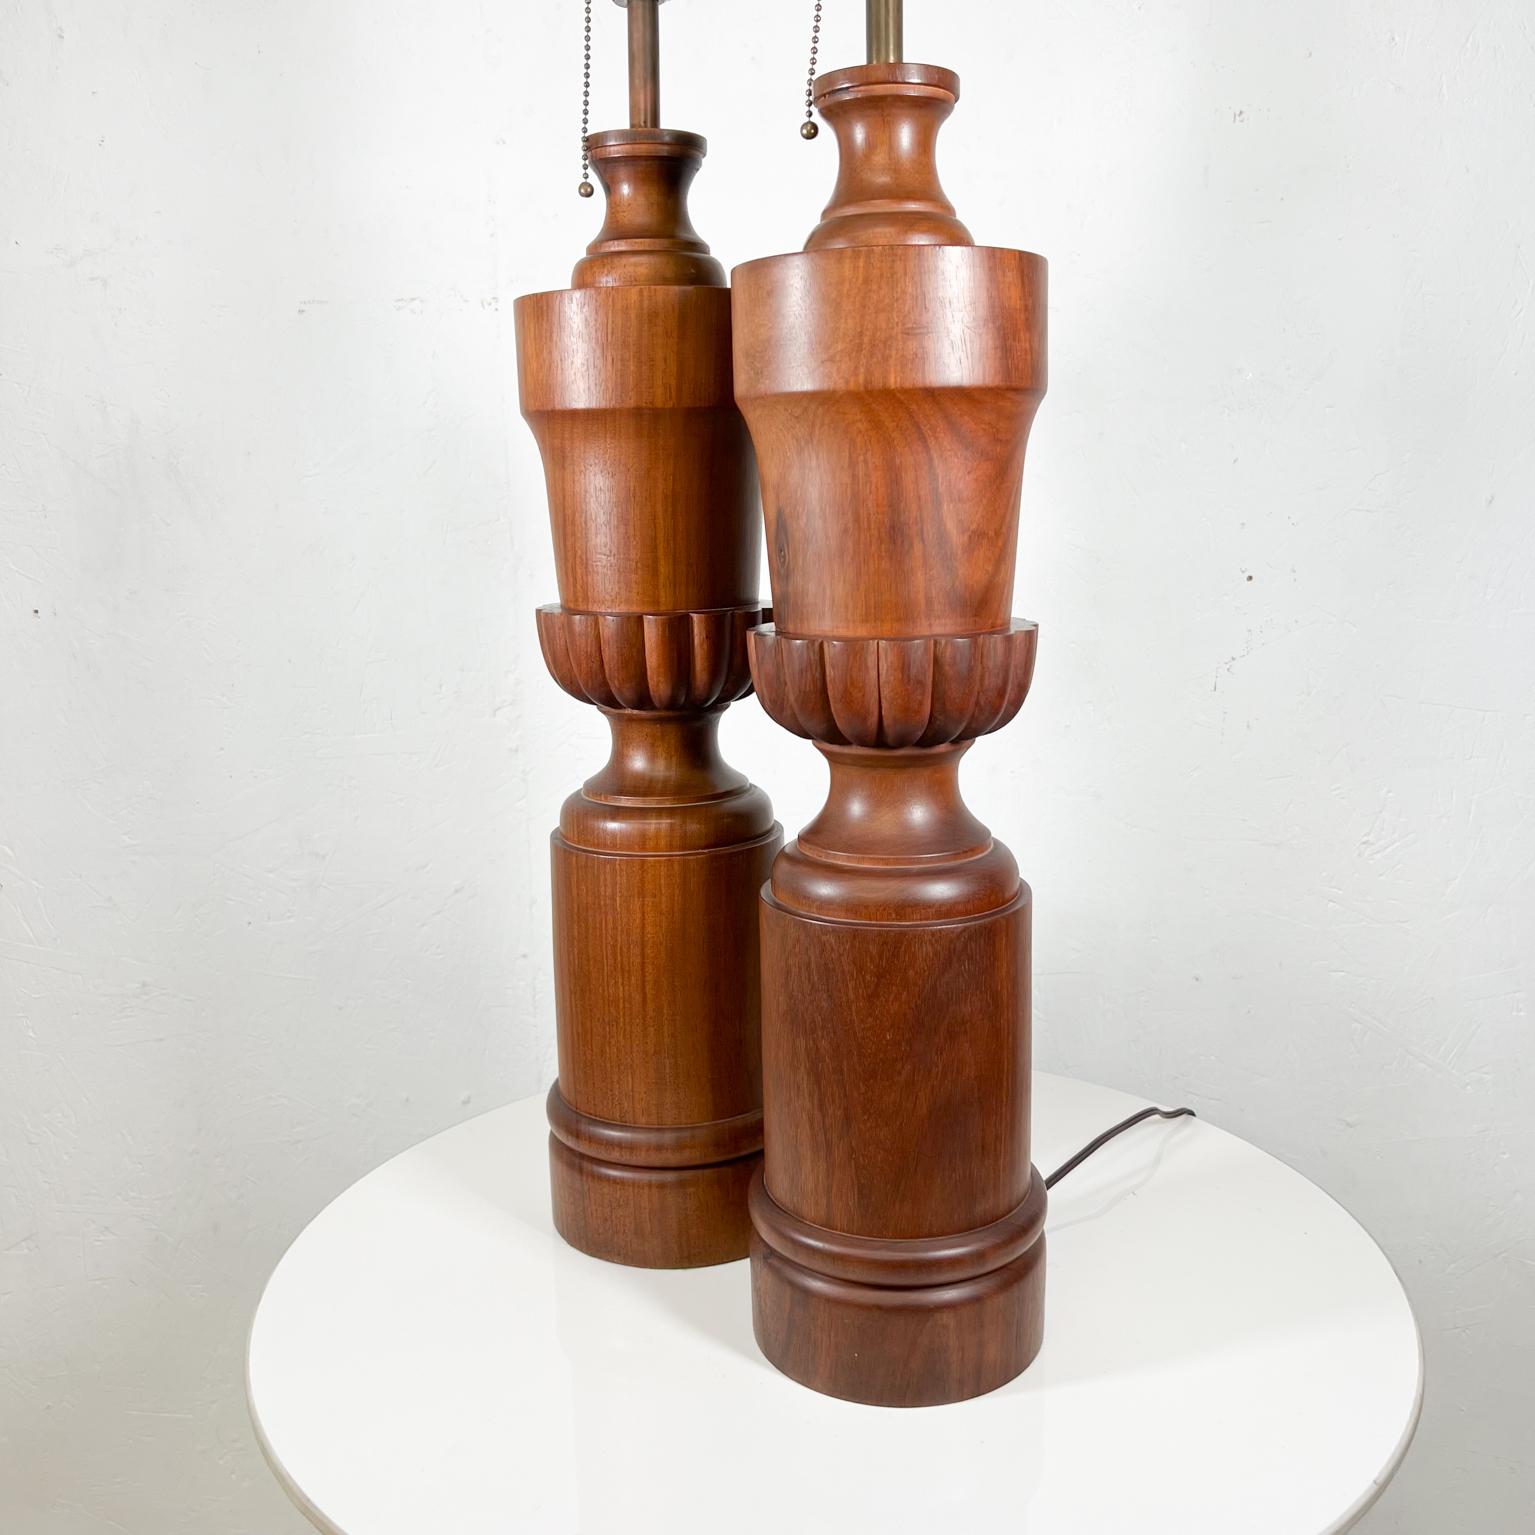 1950s Sculptural Modern Table Lamps Solid African Mahogany Wood In Good Condition For Sale In Chula Vista, CA